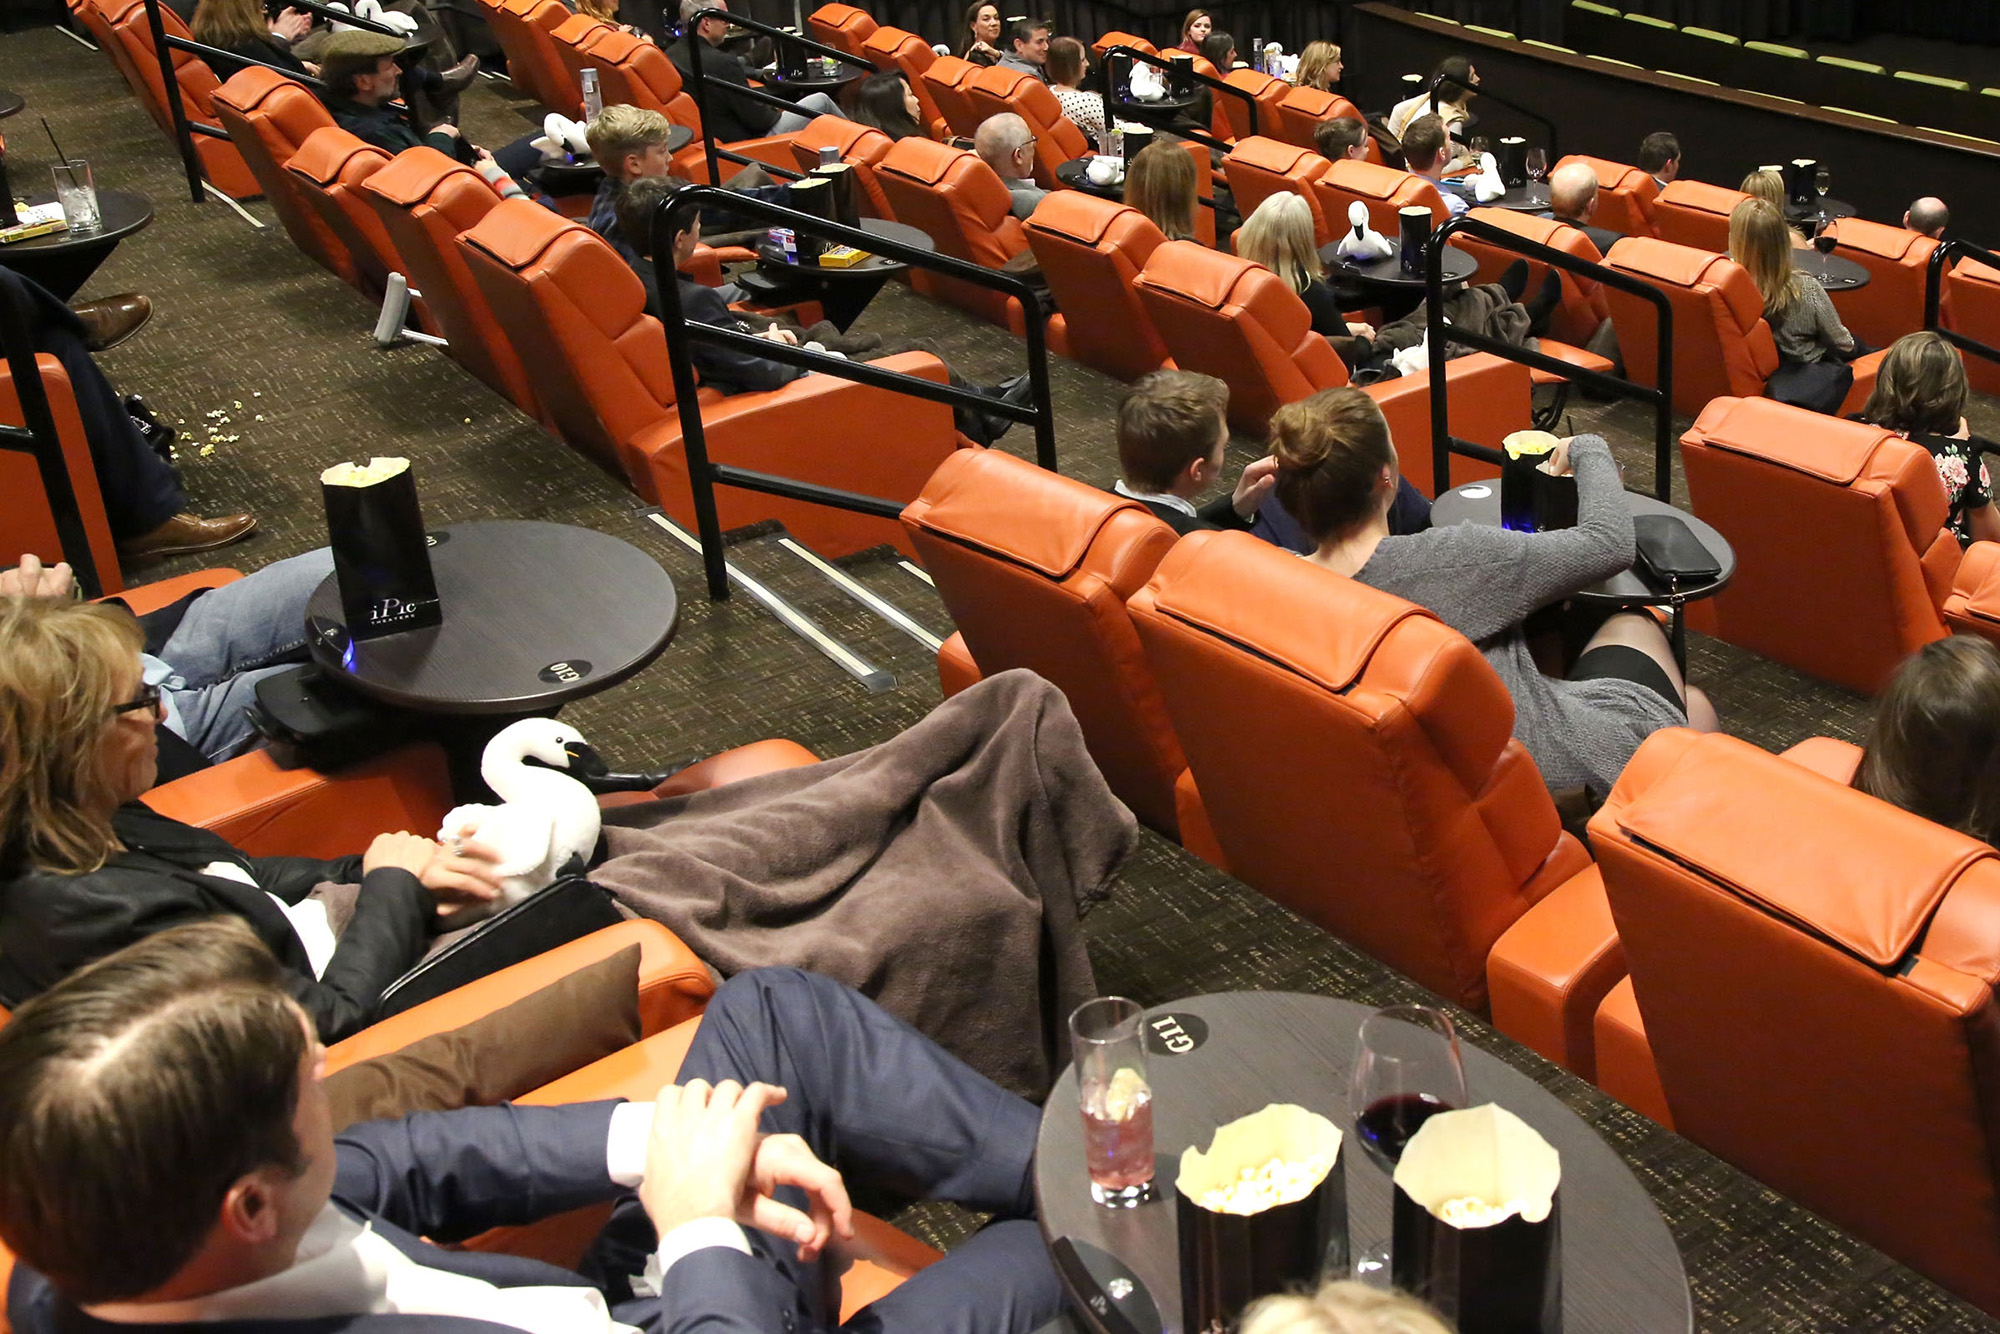 IPIC Movie Chain Files For Bankruptcy, May Sell Itself - Bloomberg